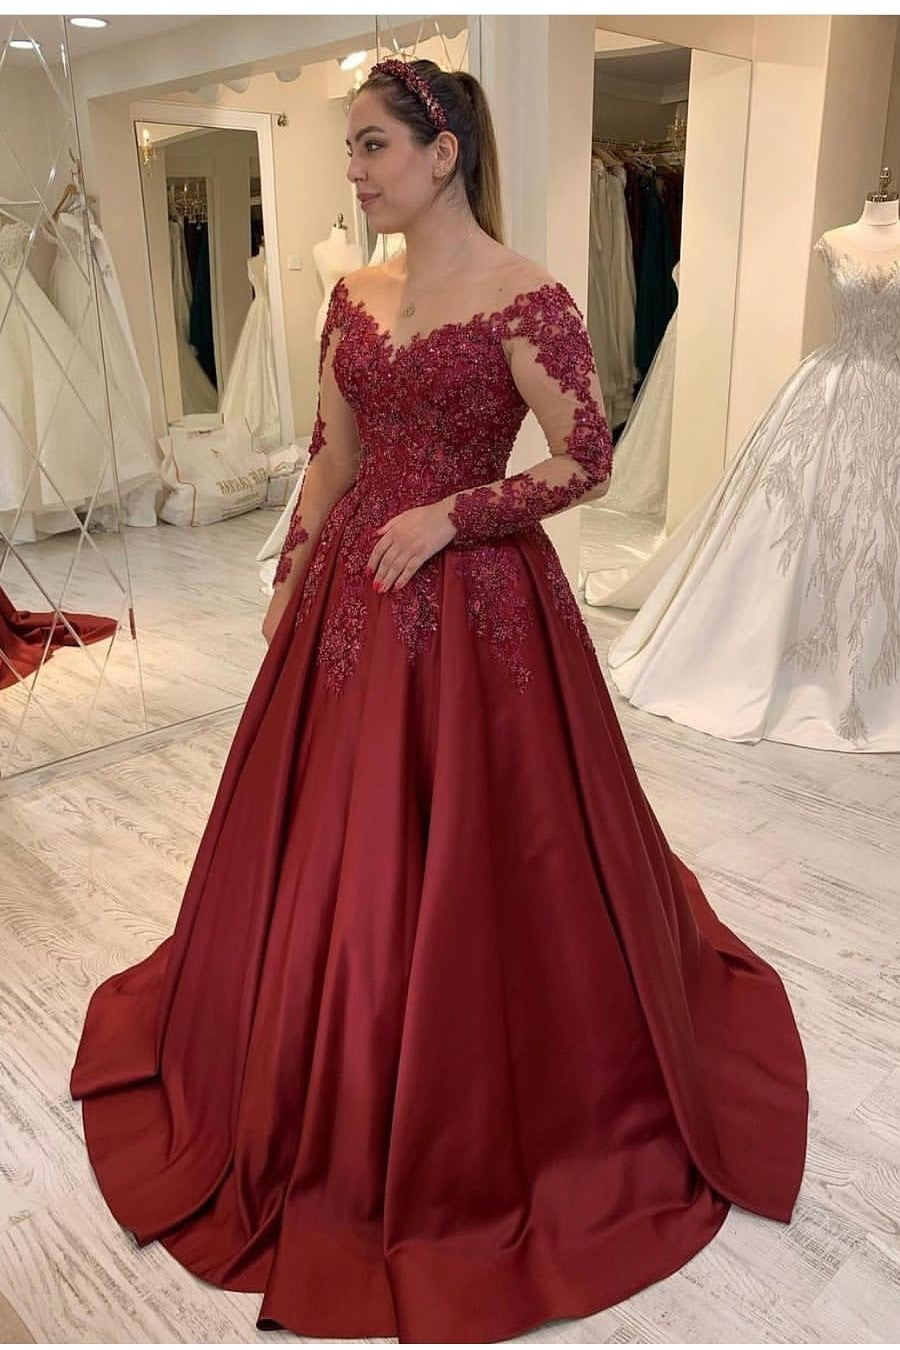 Satin Lace Burgundy Evening Gown With Illusion Sleeves Loveangeldress 